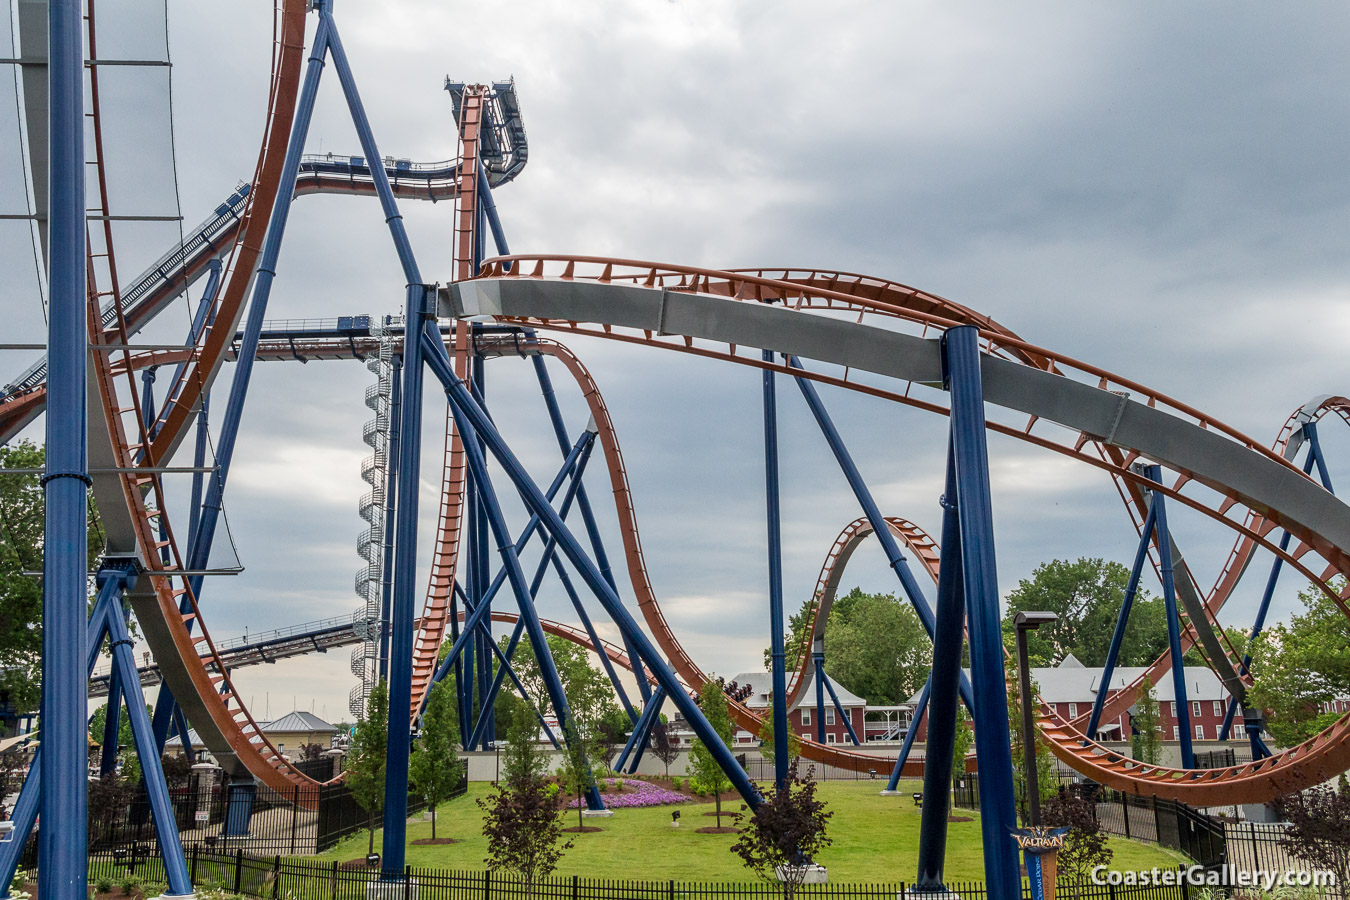 Pictures of the Valravn roller coaster